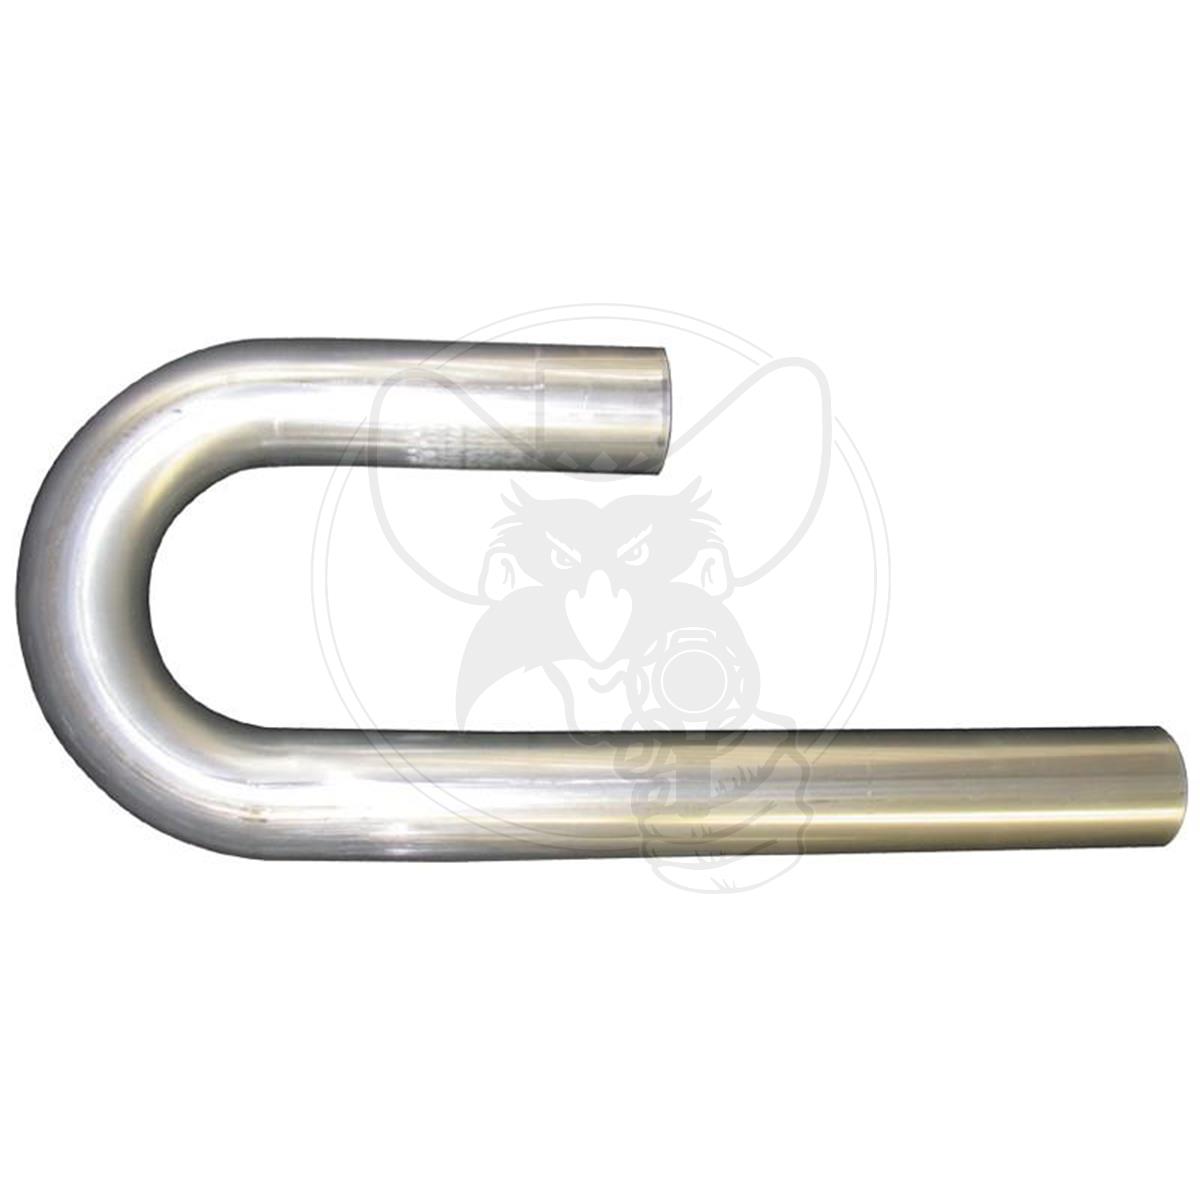 AEROFLOW 180° Stainless J-Bend Tubing 2.0" OD WITH 6" & 12" LEGS